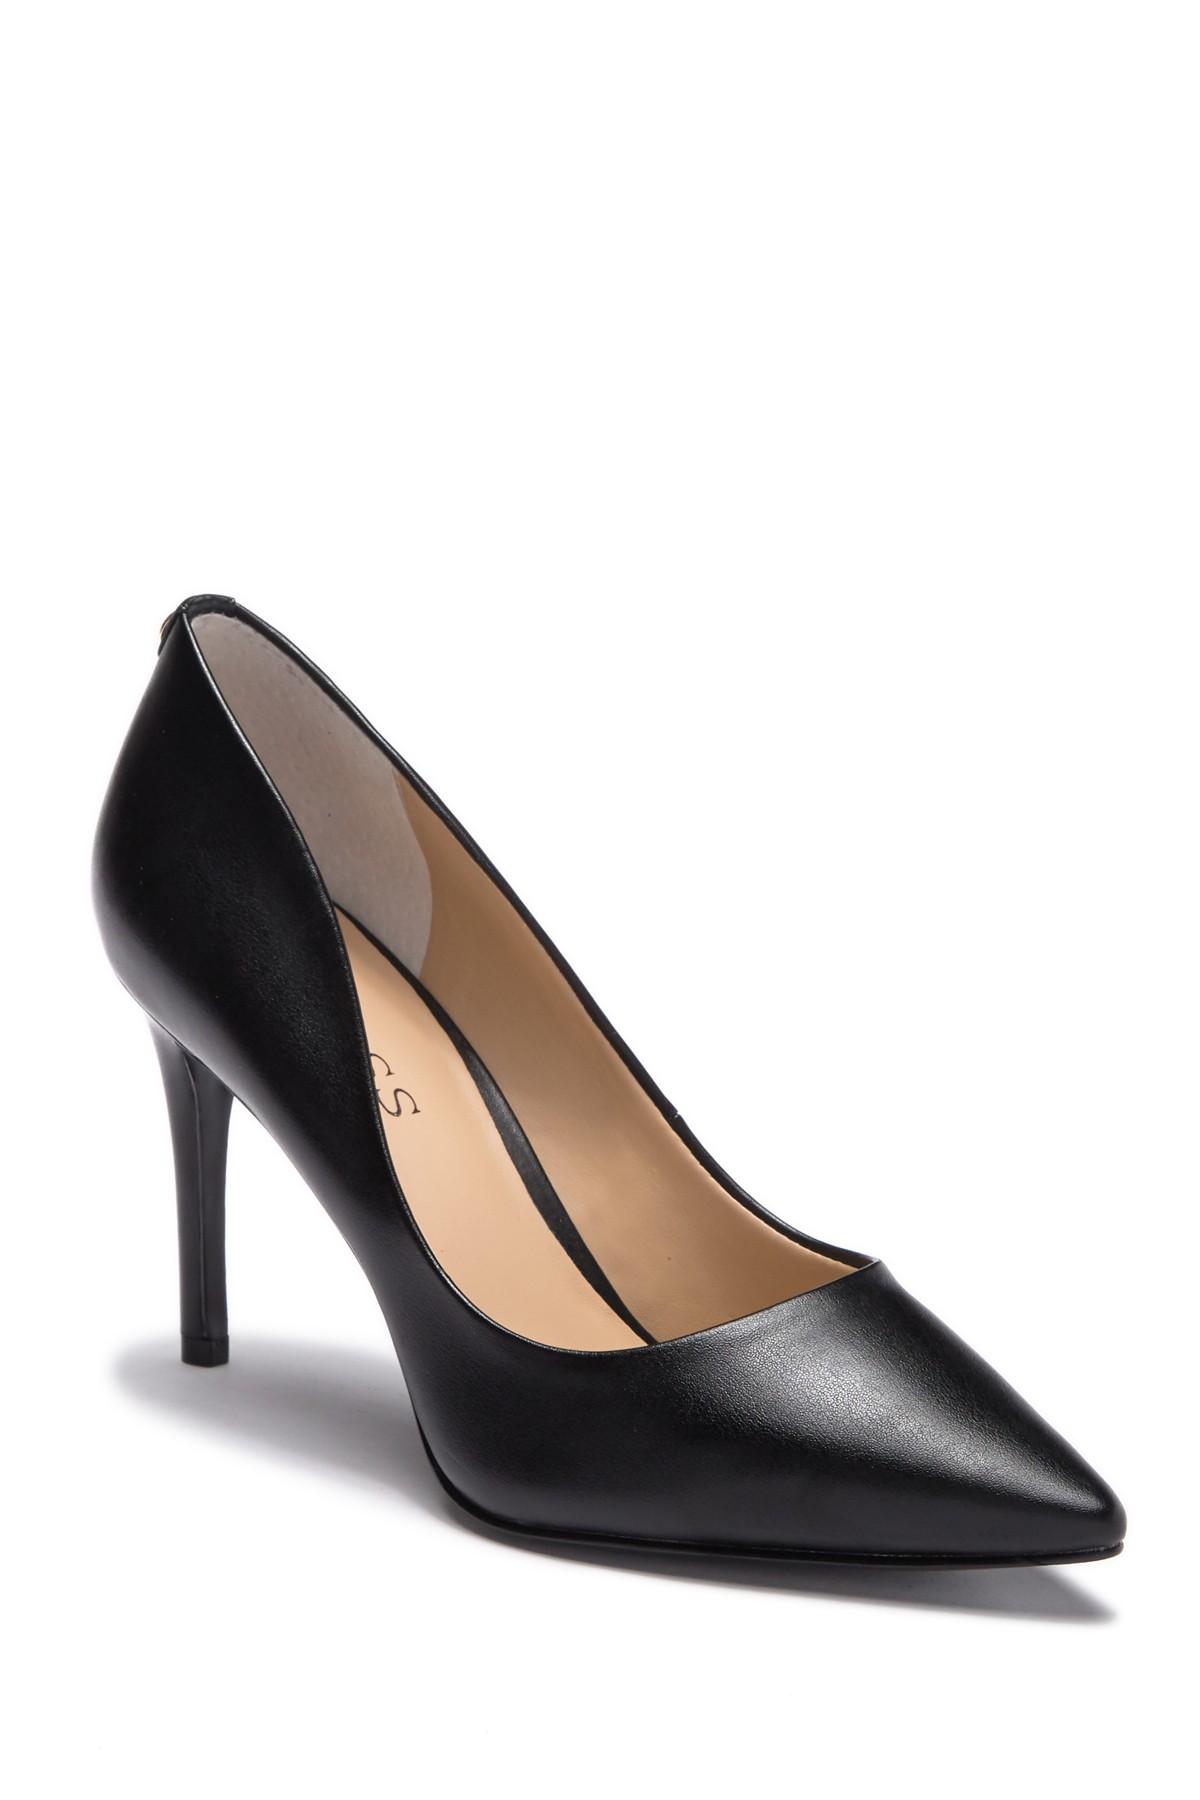 Guess Leather Bennie Pointed Toe Pump in Black - Lyst